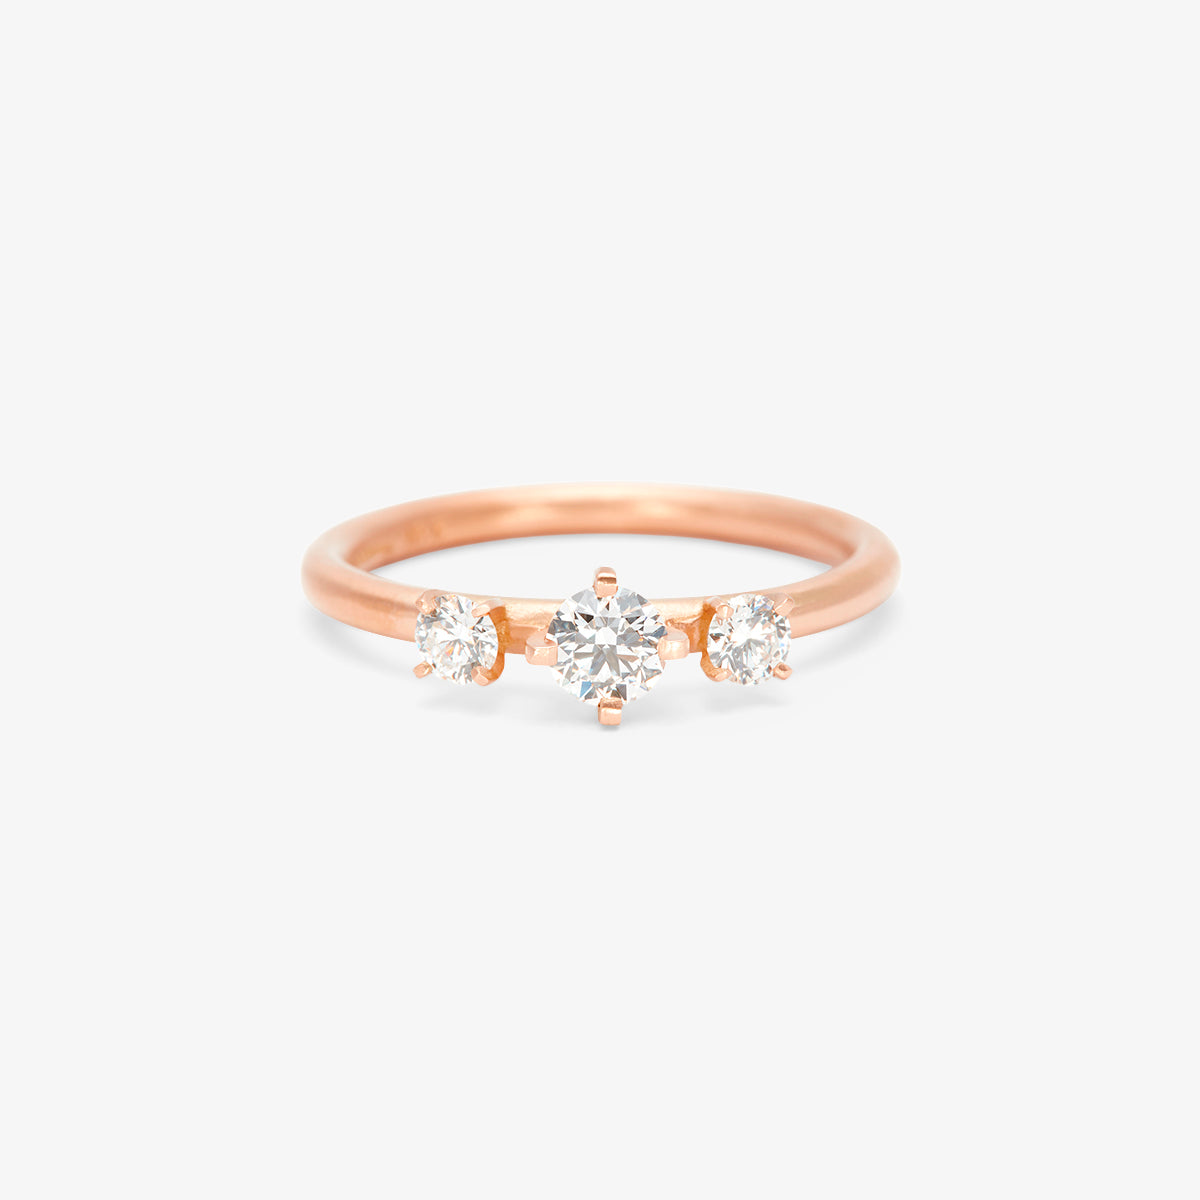 Swarovski Orange Fashion Finger Ring Price Starting From Rs 19,104 | Find  Verified Sellers at Justdial